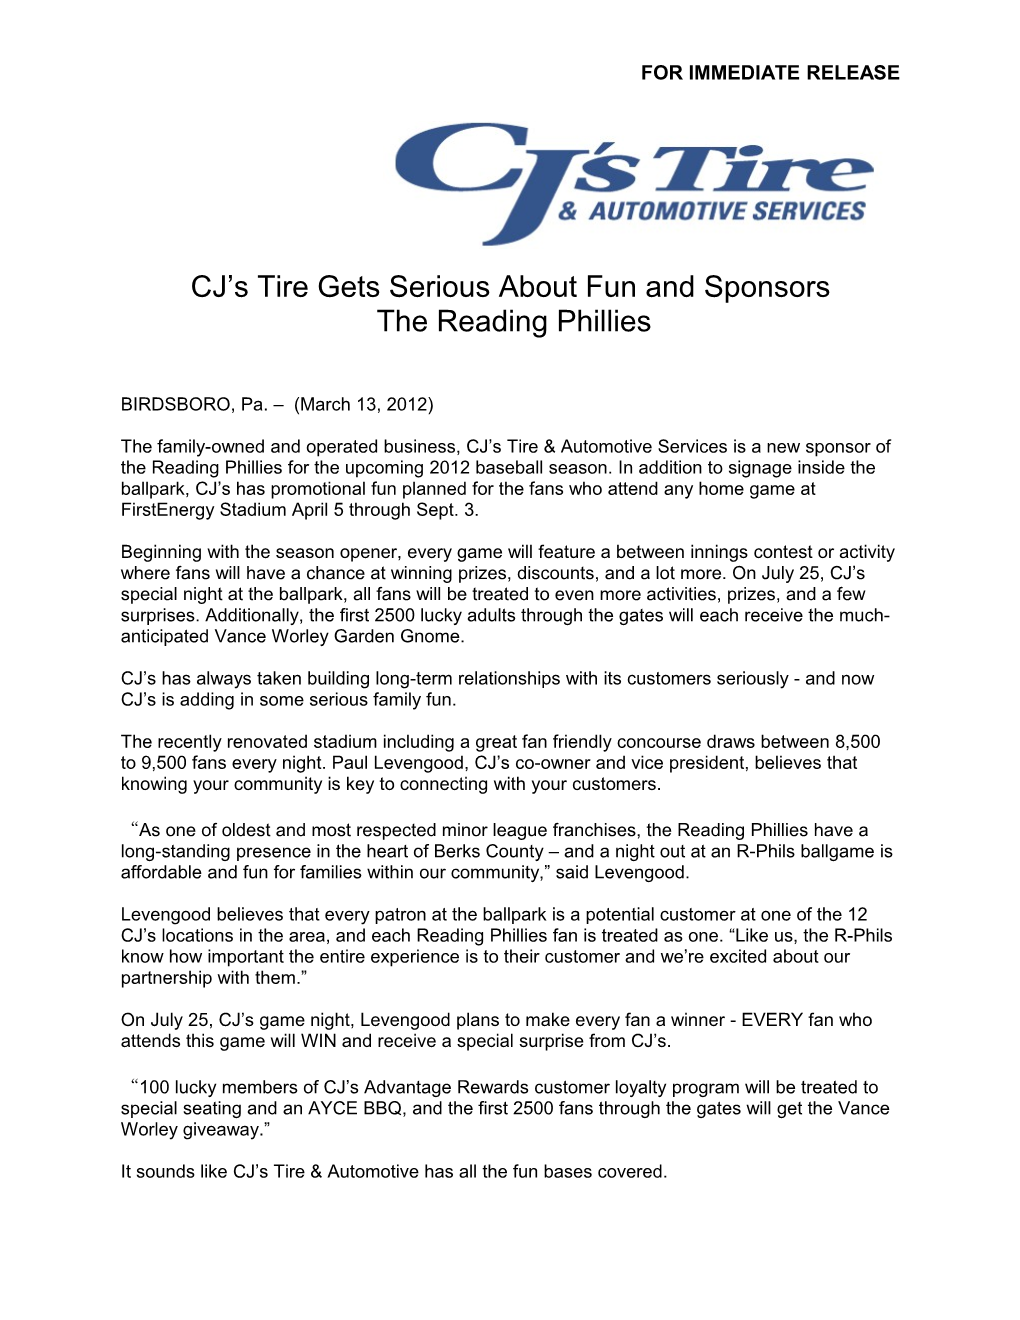 CJ S Tire Gets Serious About Fun and Sponsors